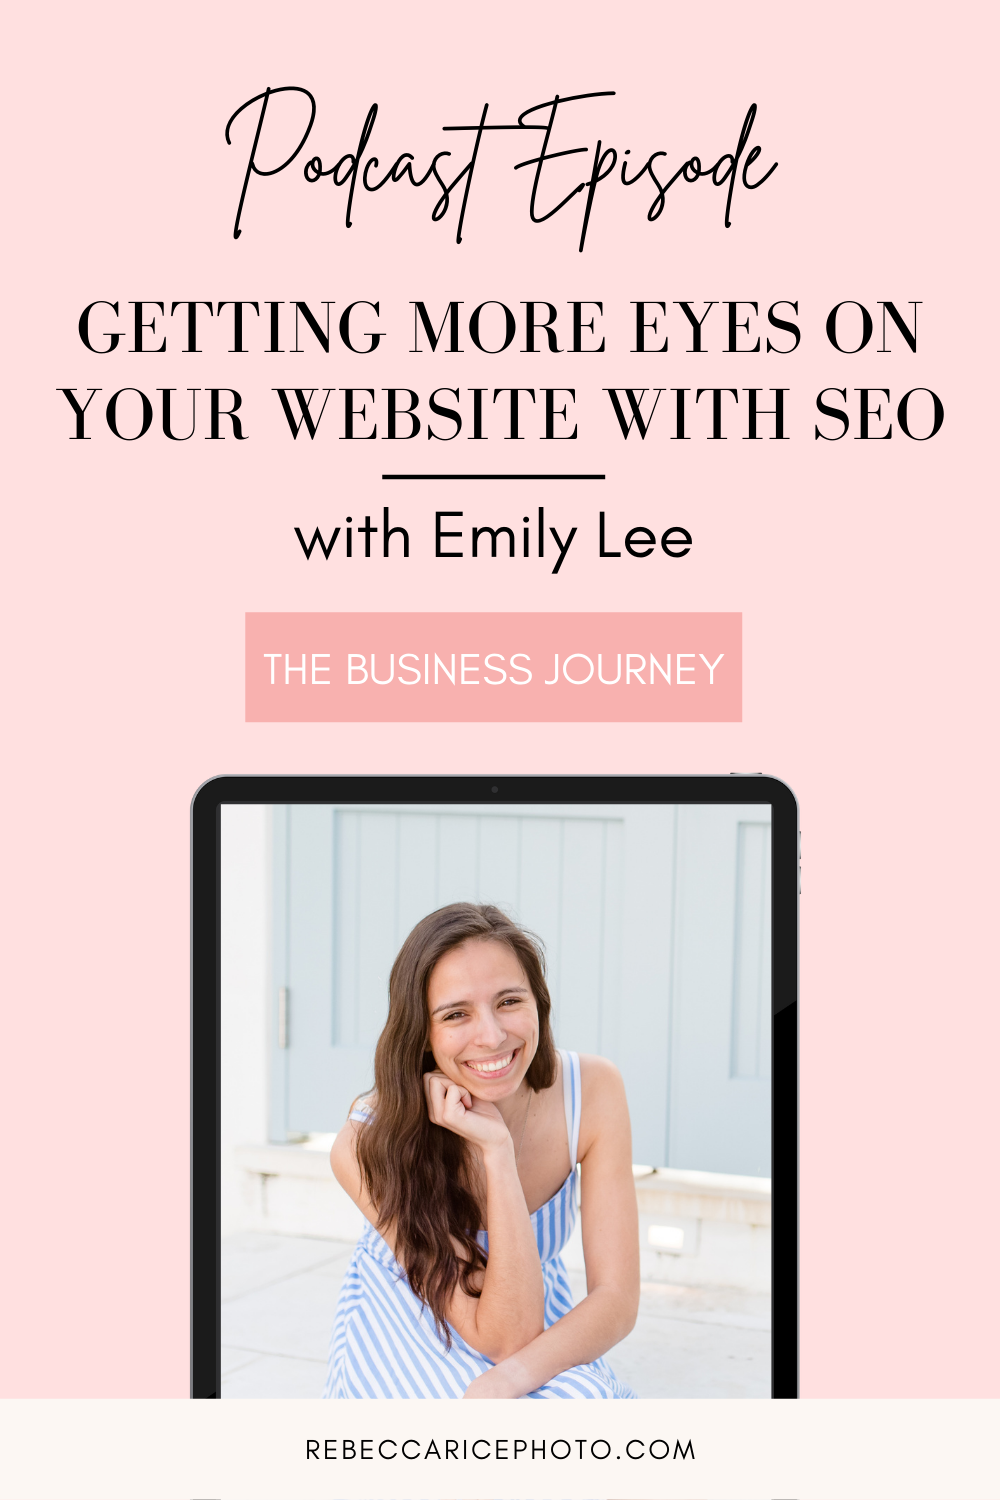 How to use SEO to get more eyes on your website with Emily Lee